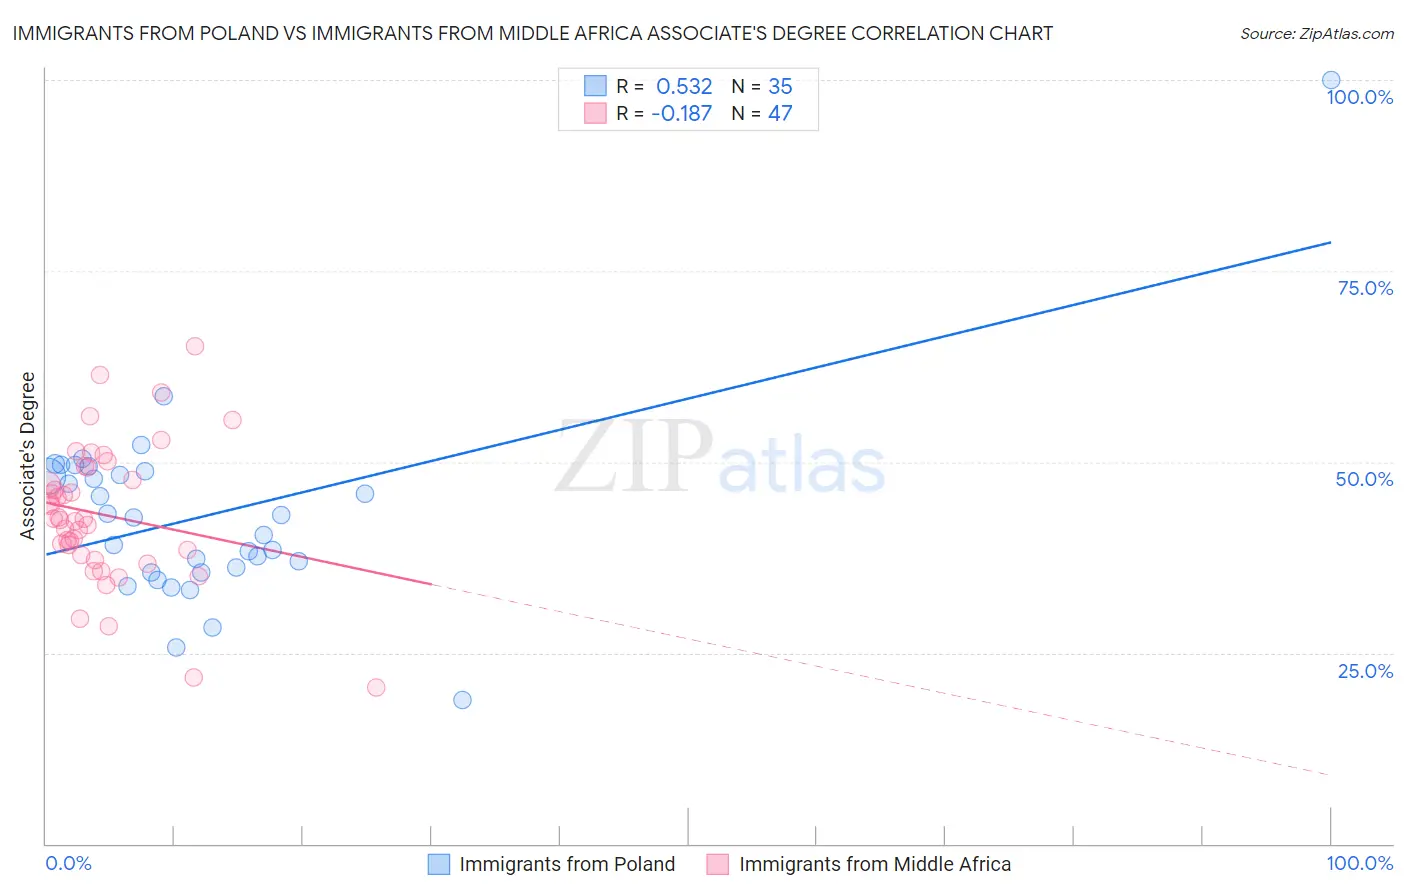 Immigrants from Poland vs Immigrants from Middle Africa Associate's Degree